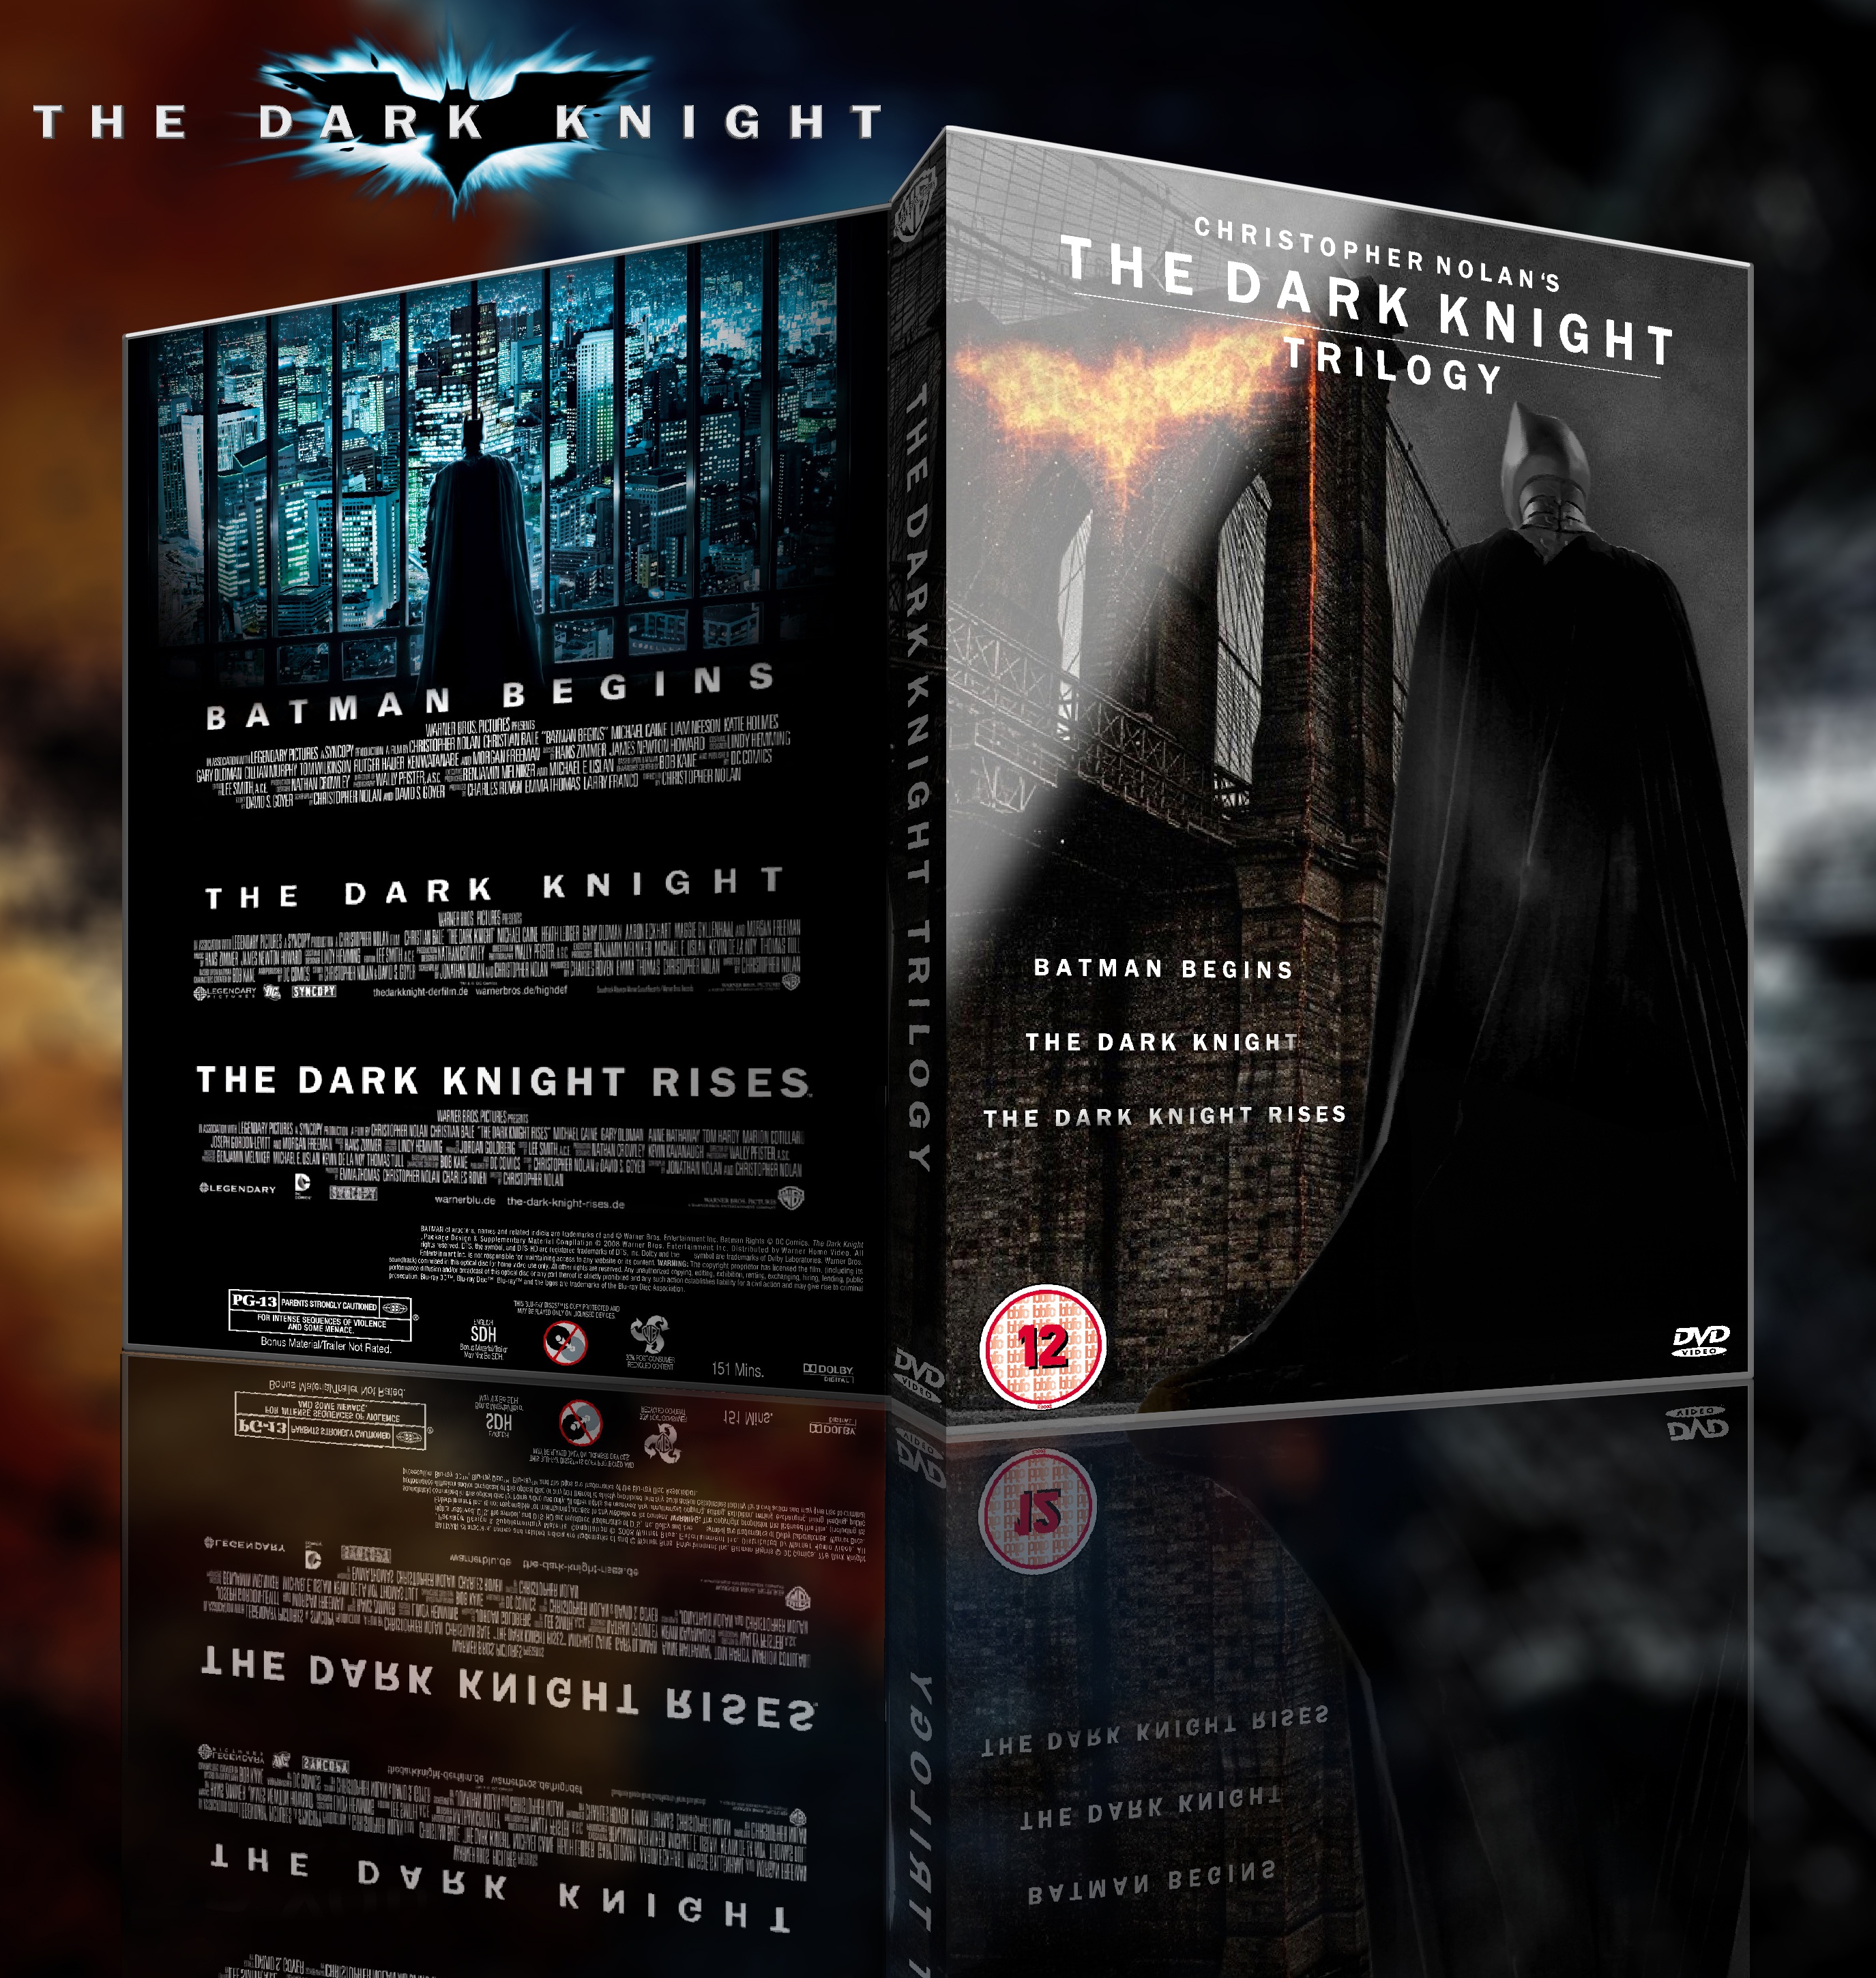 The Dark Knight Trilogy box cover